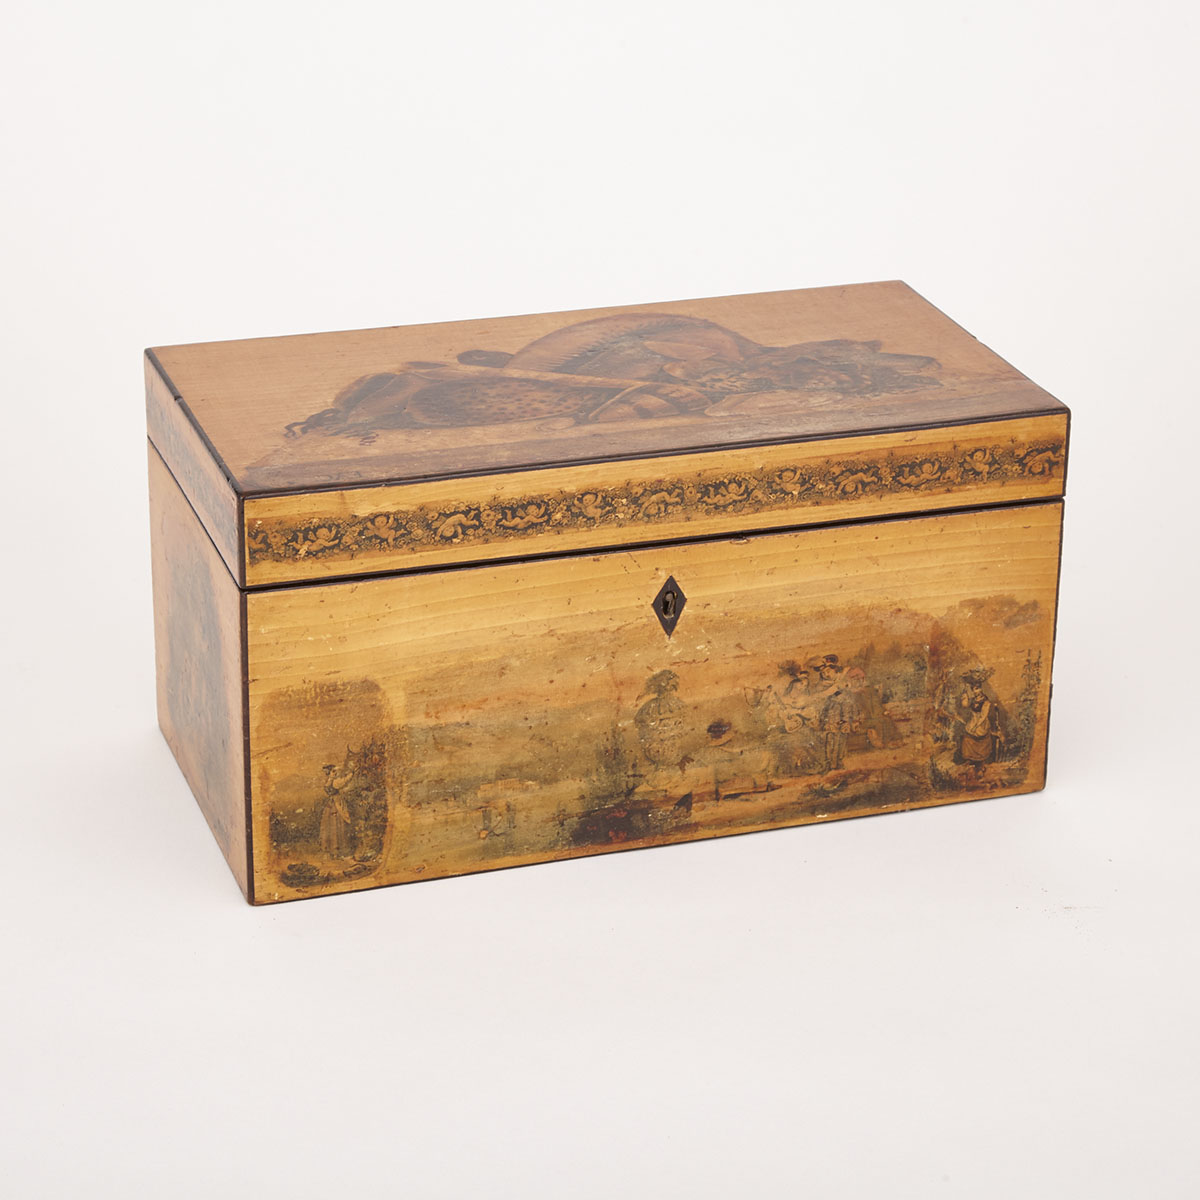 Large Regency Mauchline Ware Sycamore Tea Caddy, c.1820